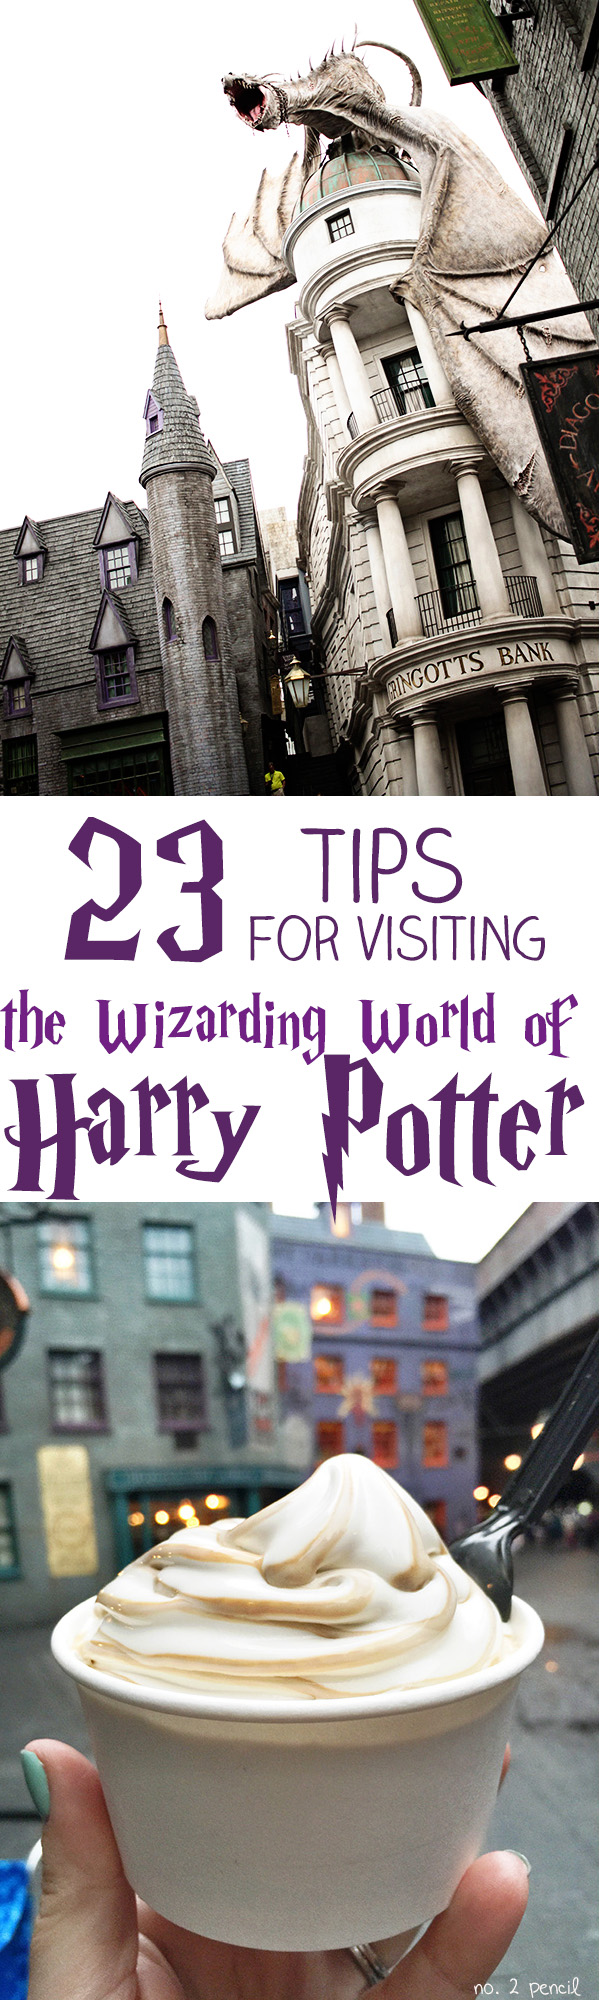 23 Tips for Visiting the Wizarding World of Harry Potter